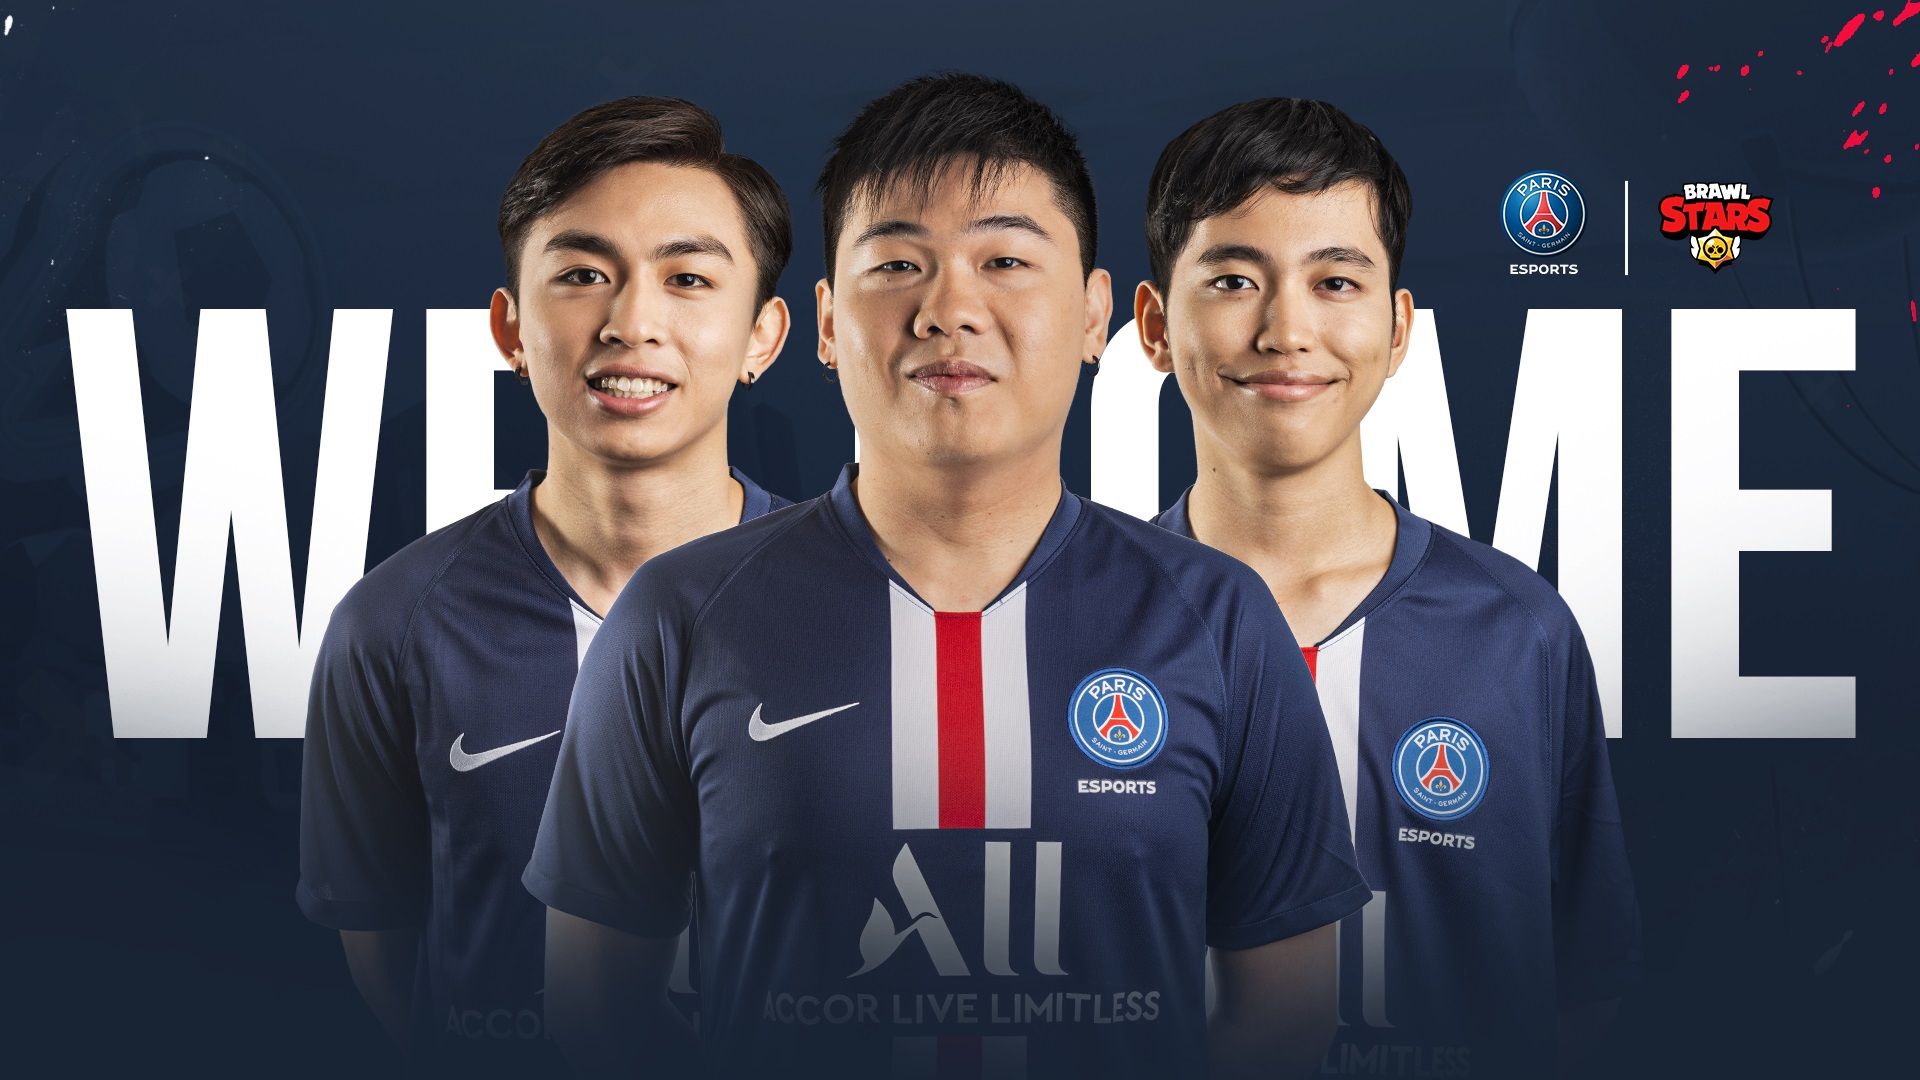 This Singapore squad is the best Brawl Stars team in the world ONE Esports